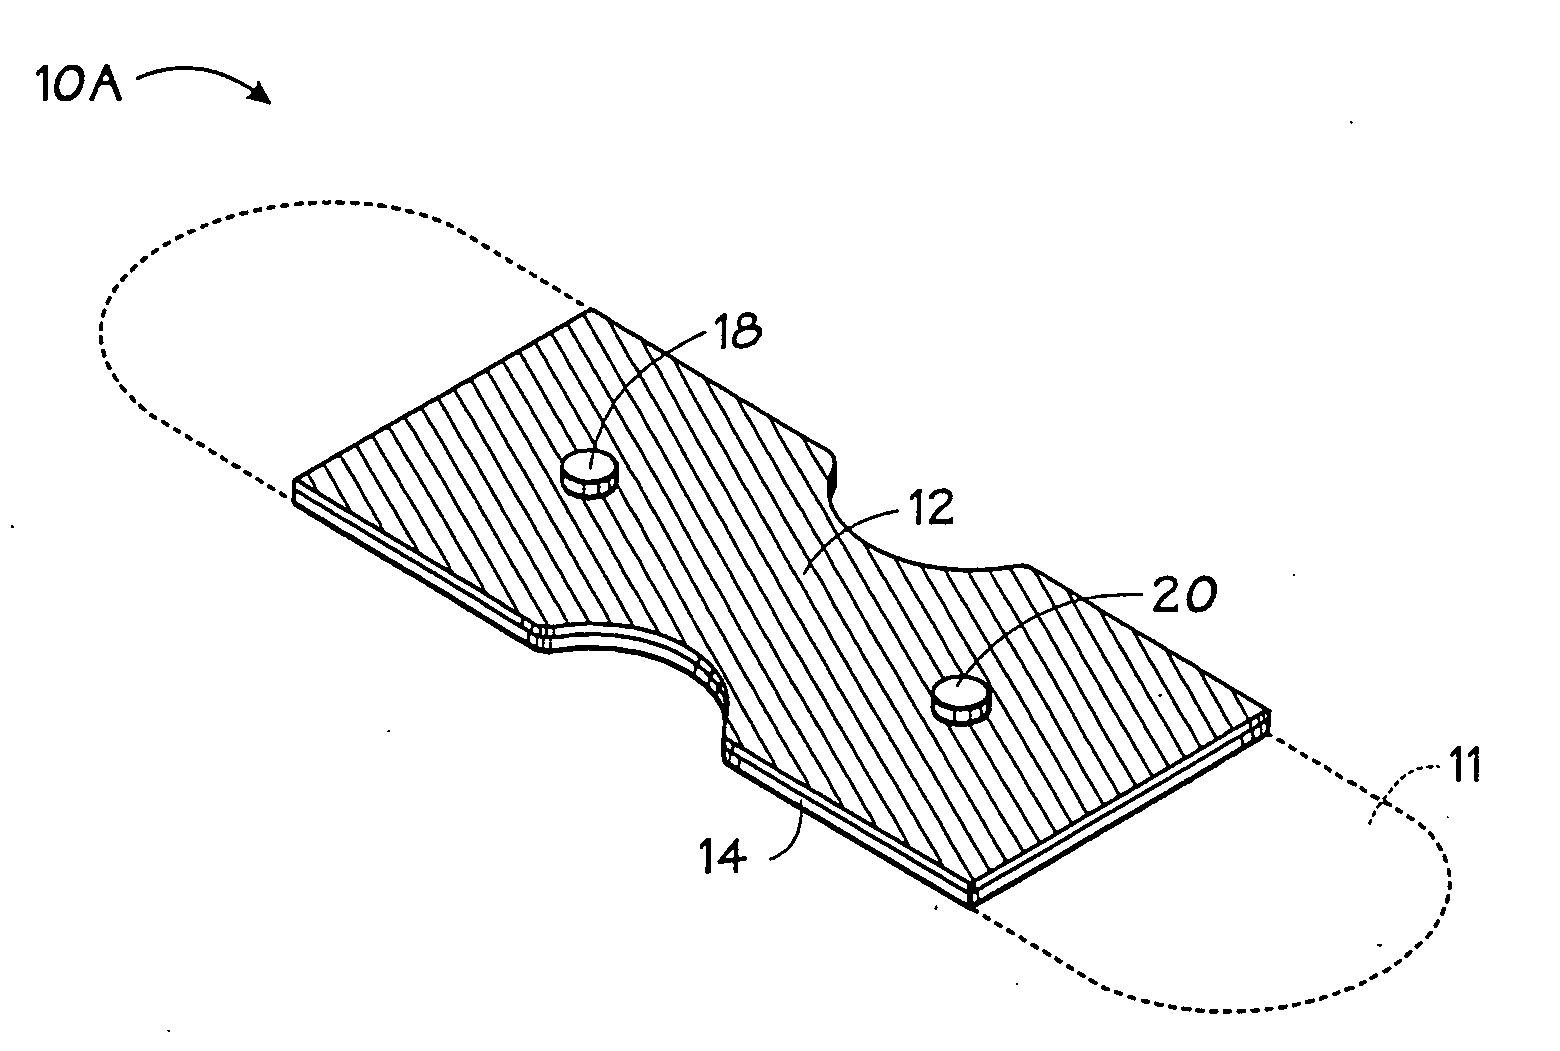 Opaque, electrically nonconductive region on a medical sensor